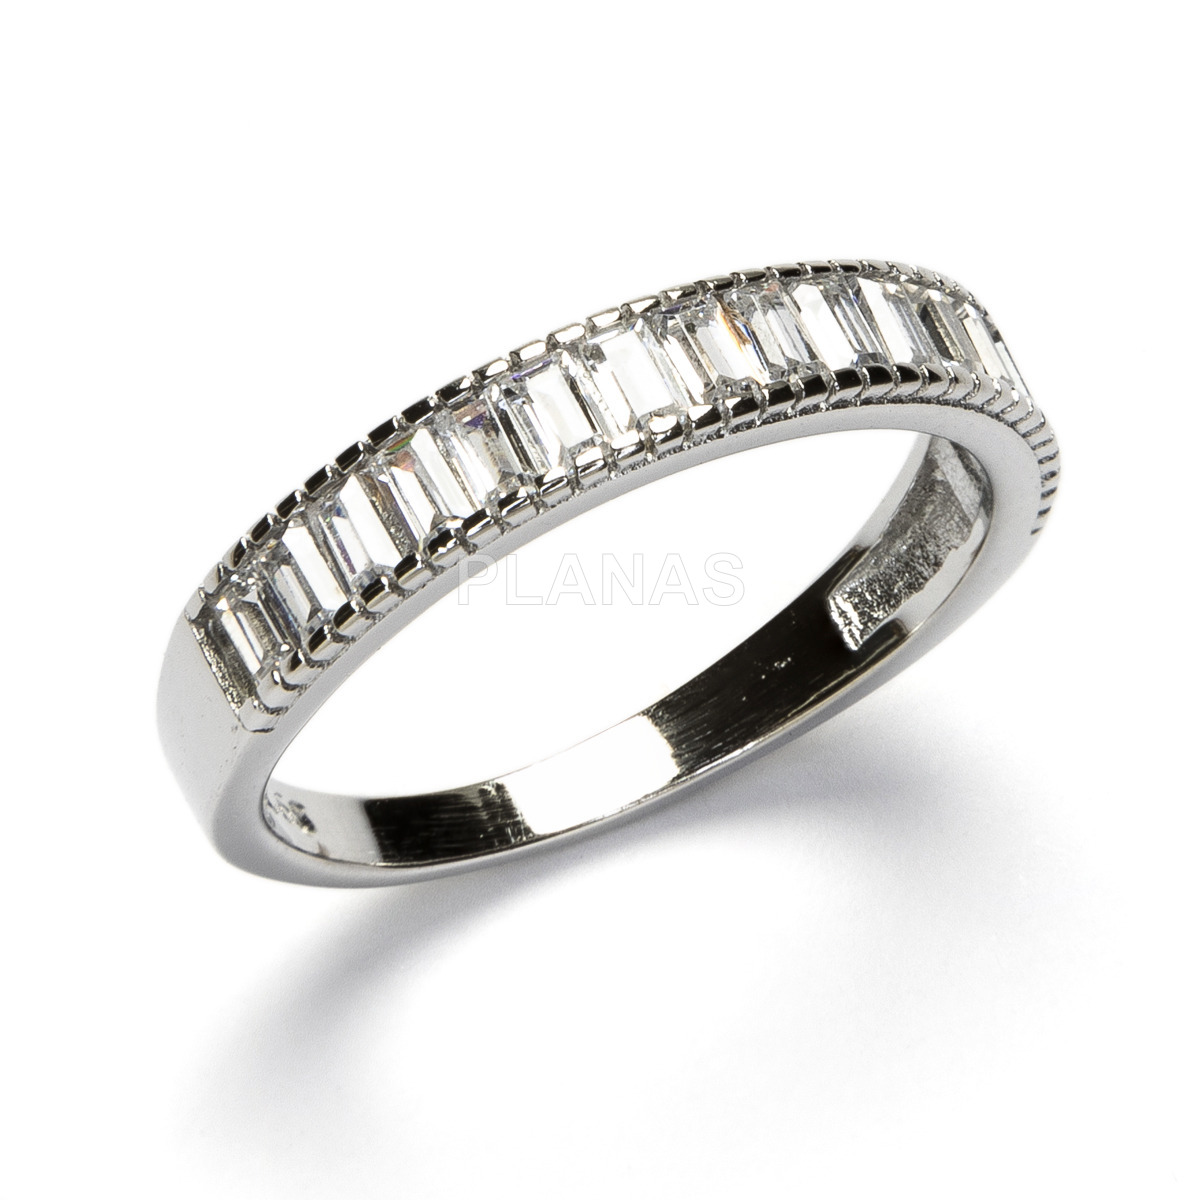 Baguette ring in rhodium plated sterling silver and white zircons.